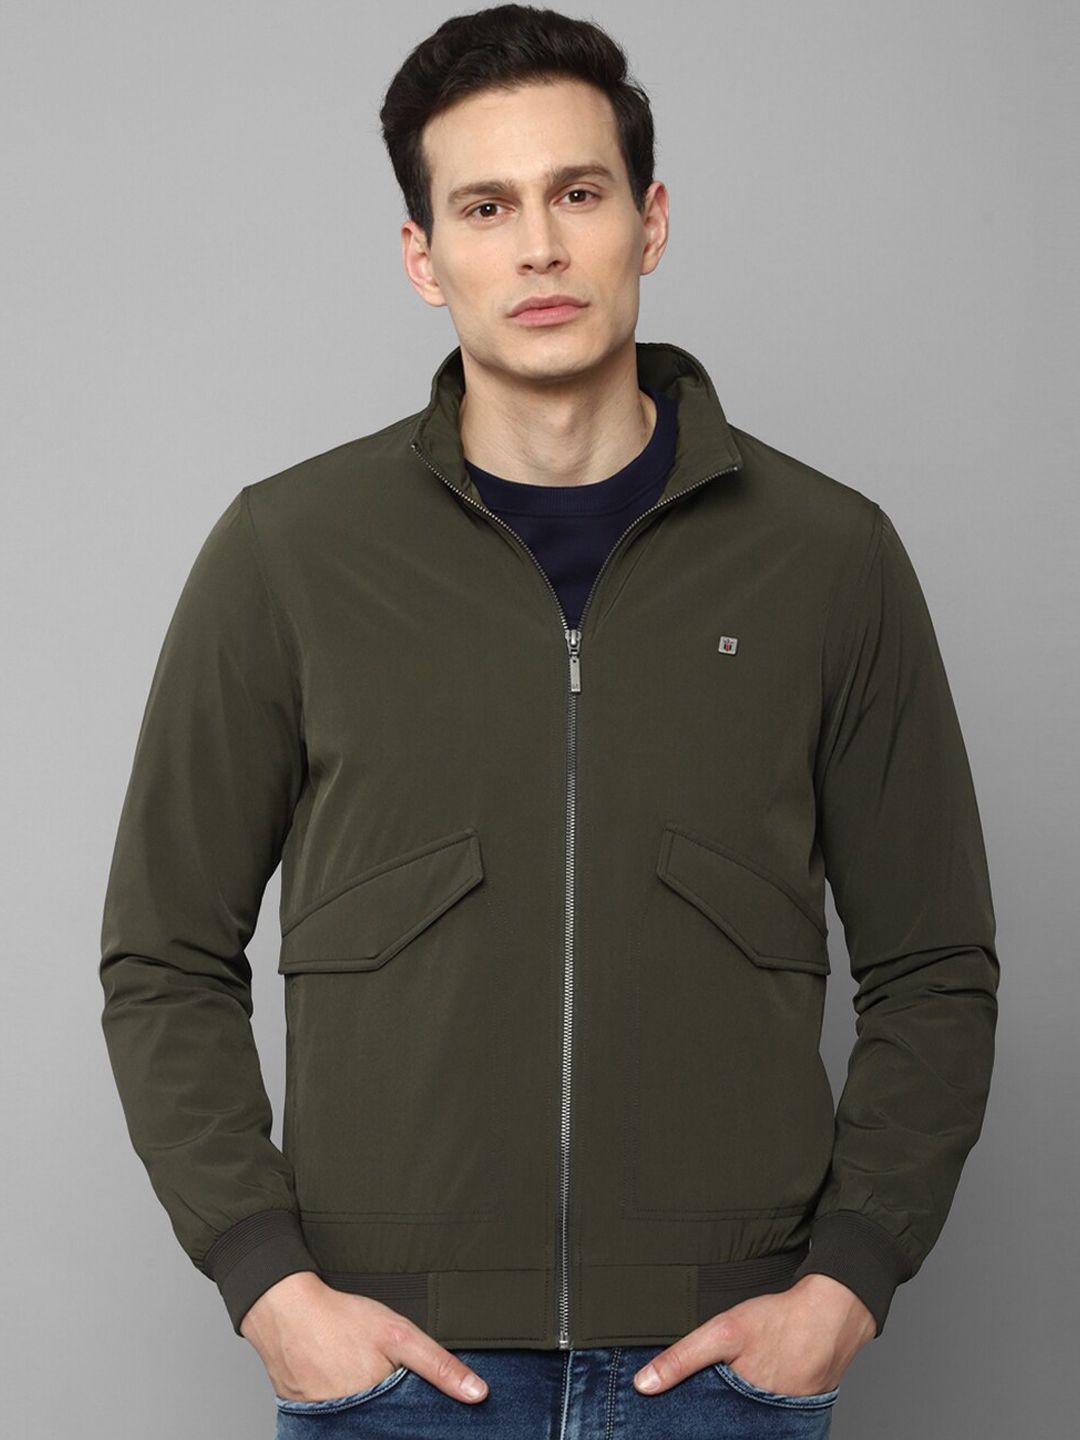 louis philippe jeans men olive green bomber jacket